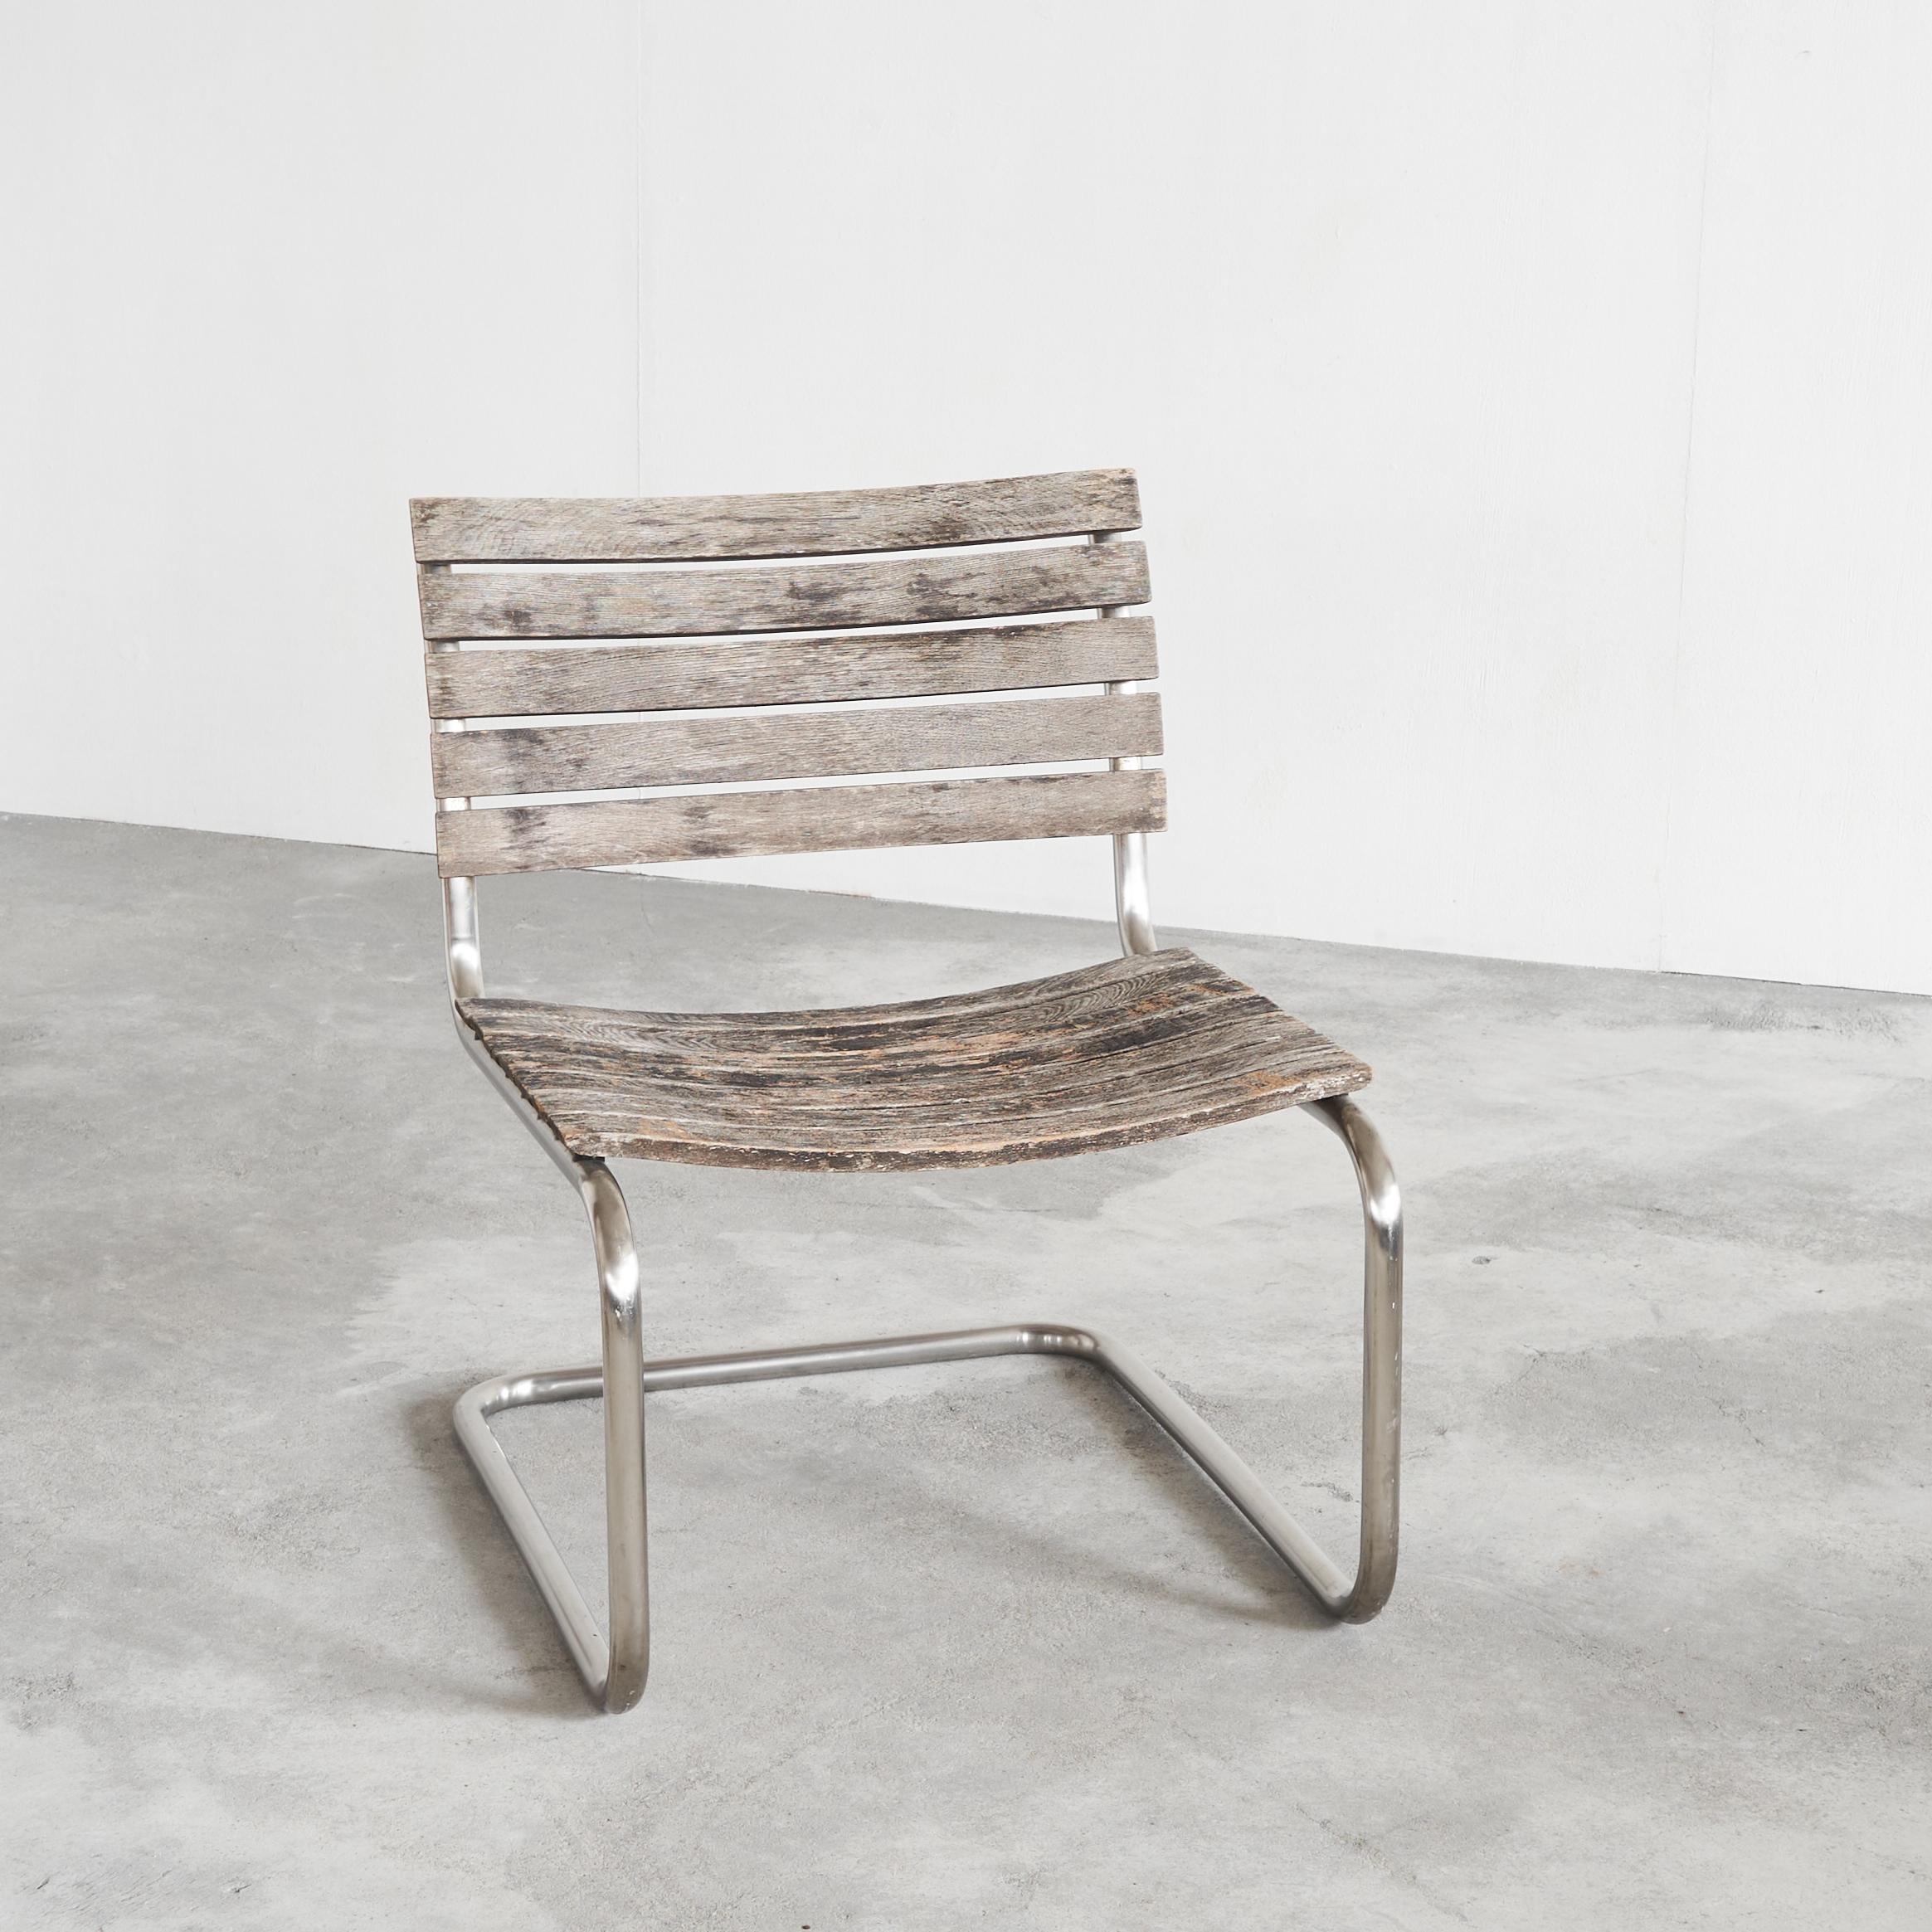 Hand-Crafted Mart Stam for Thonet Lounge Chair in Weathered Solid Iroko and Stainless Steel For Sale